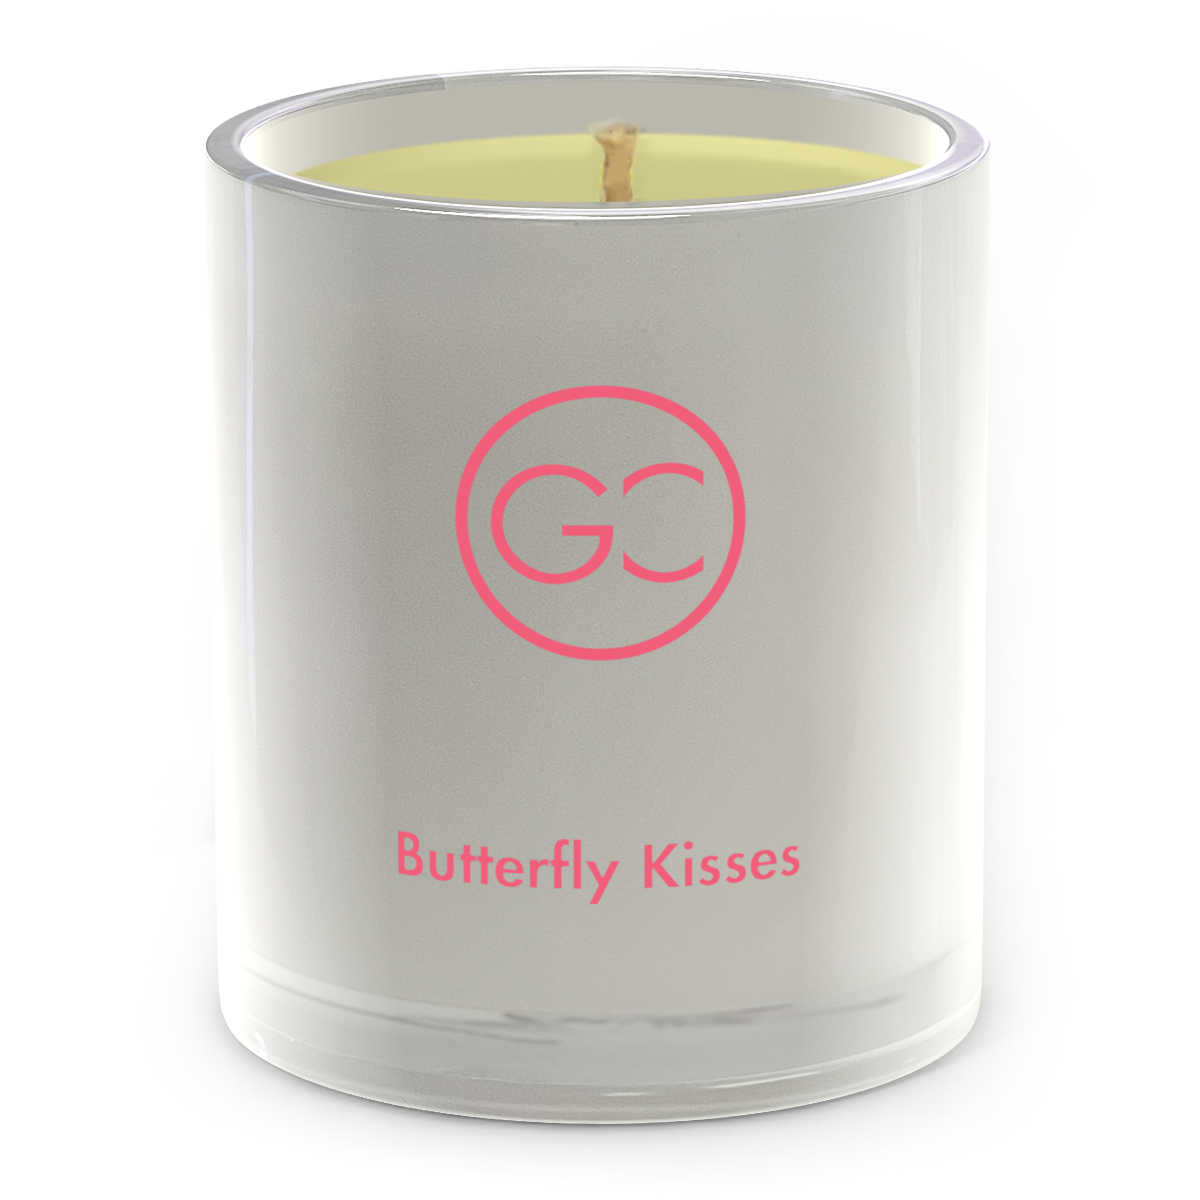 Butterfly Kisses - Sweet Pea Scented Soy Candle 55hr Burn